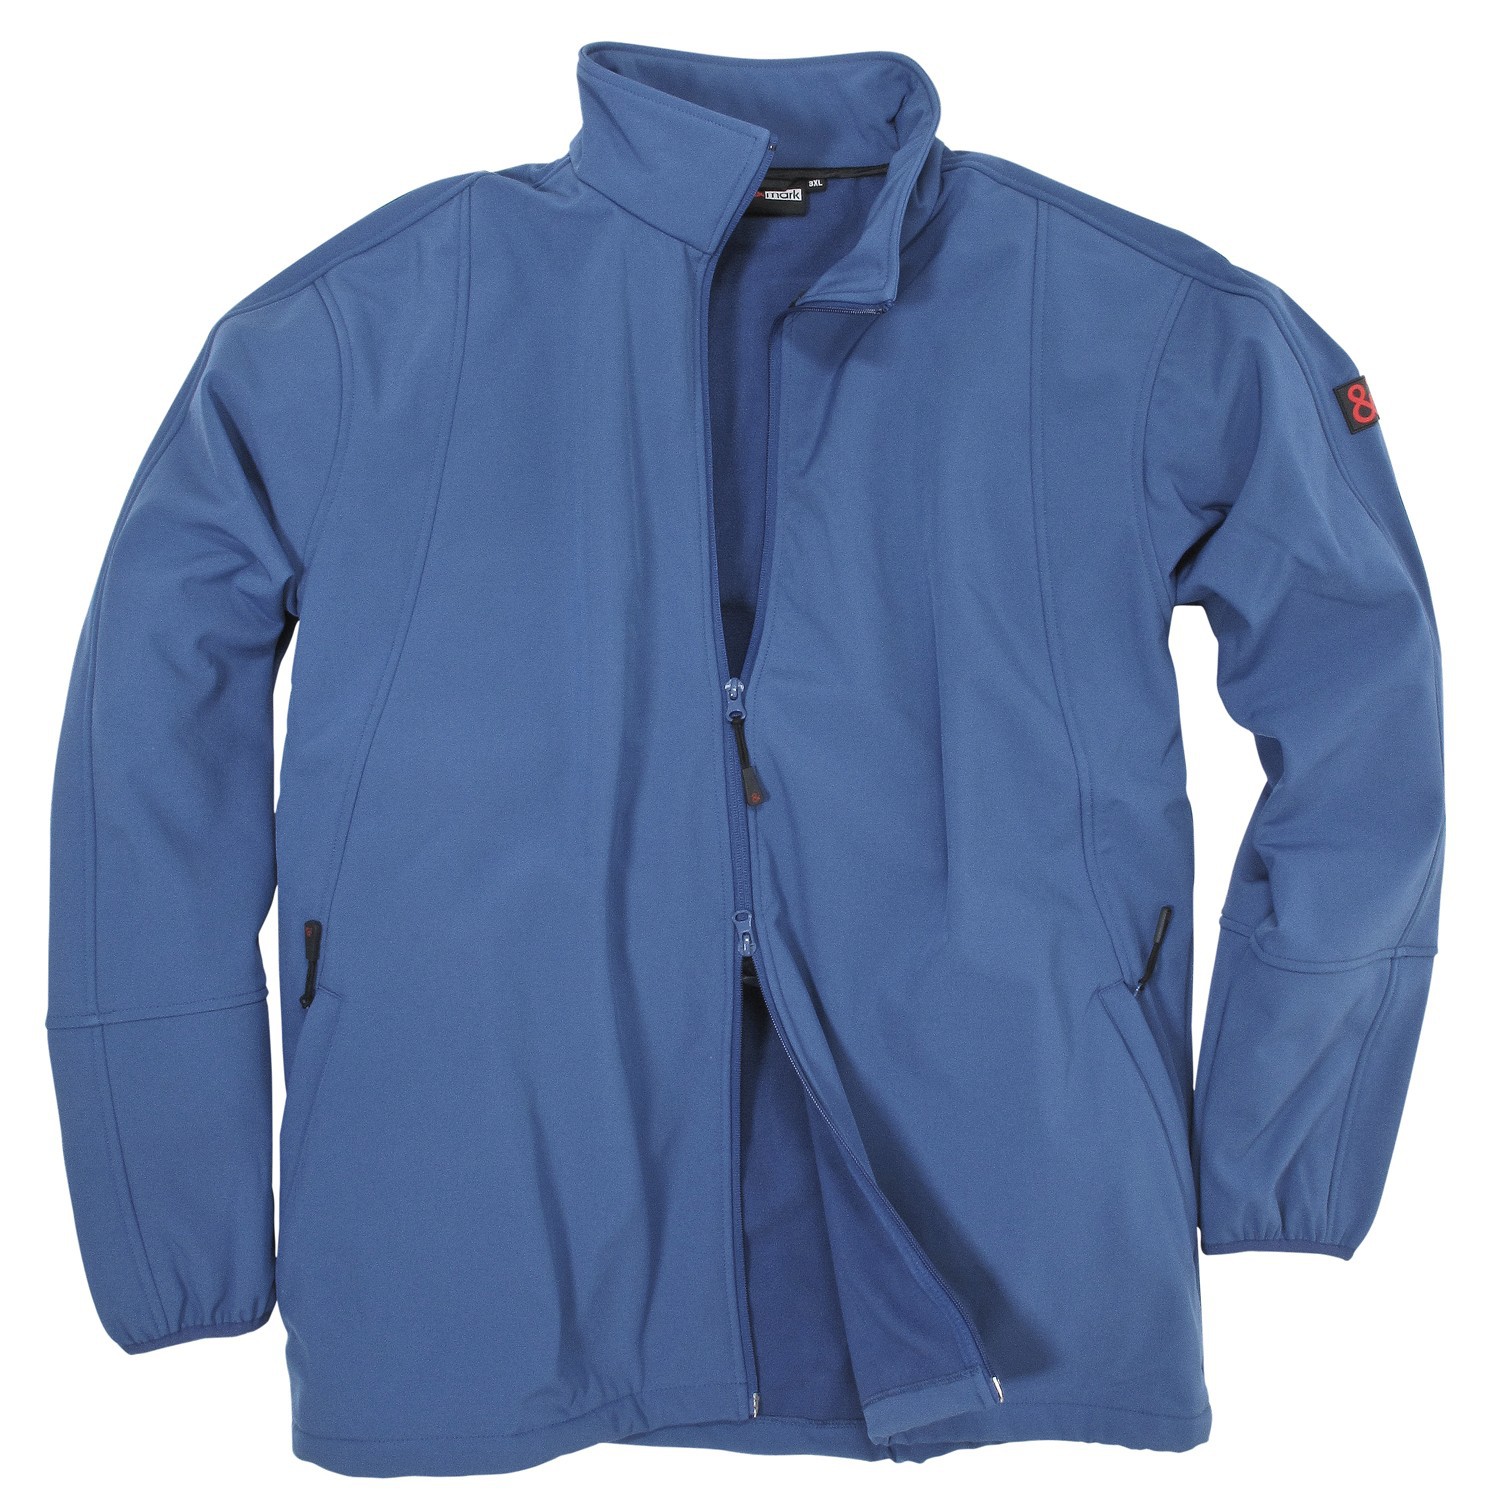 Softshell jacket in royal blue by Marc&Mark in extra large sizes up to 10XL